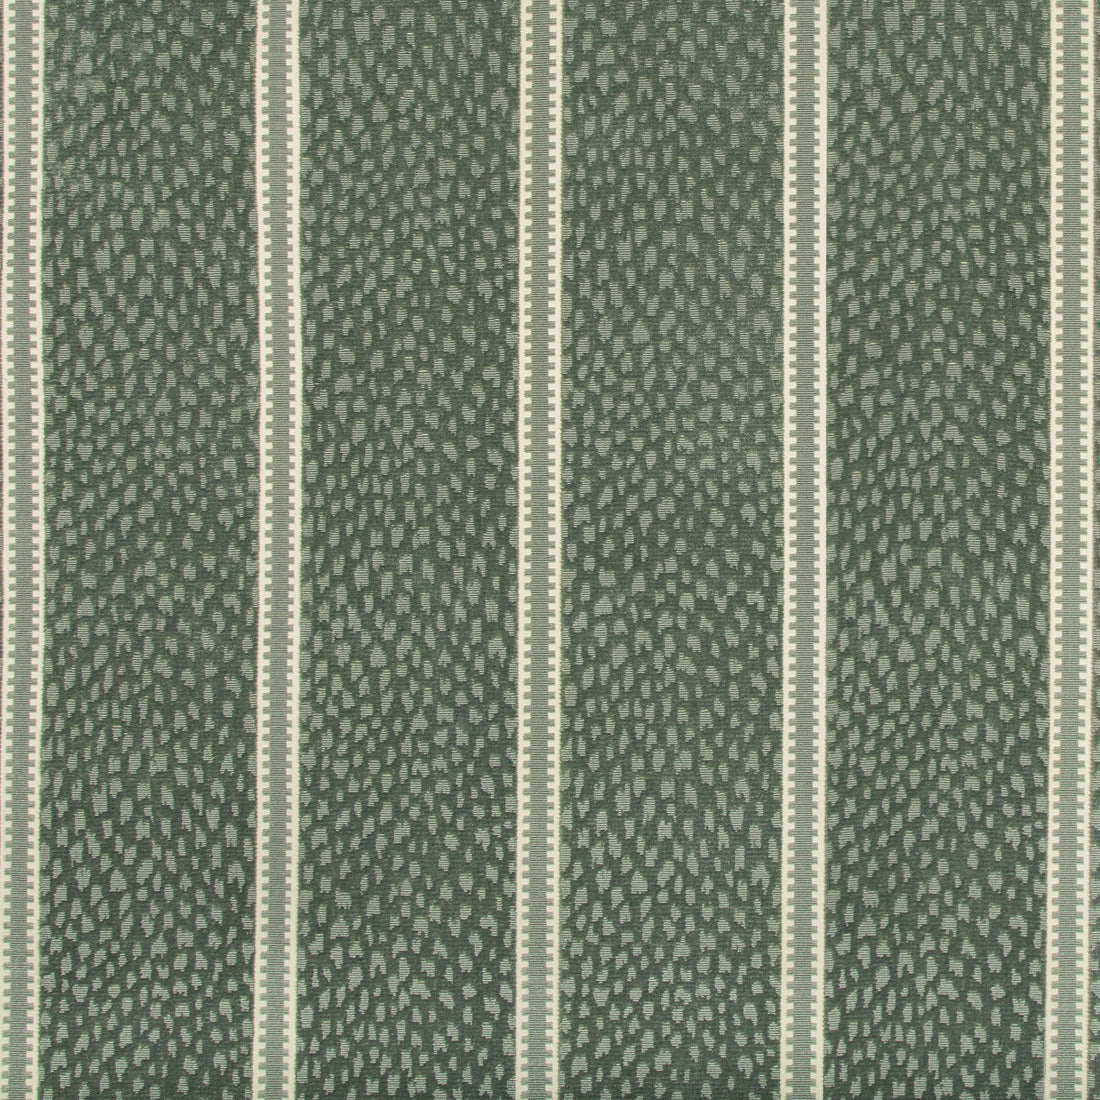 Salvator Velvet fabric in mist color - pattern 8019108.113.0 - by Brunschwig &amp; Fils in the Folio Francais collection